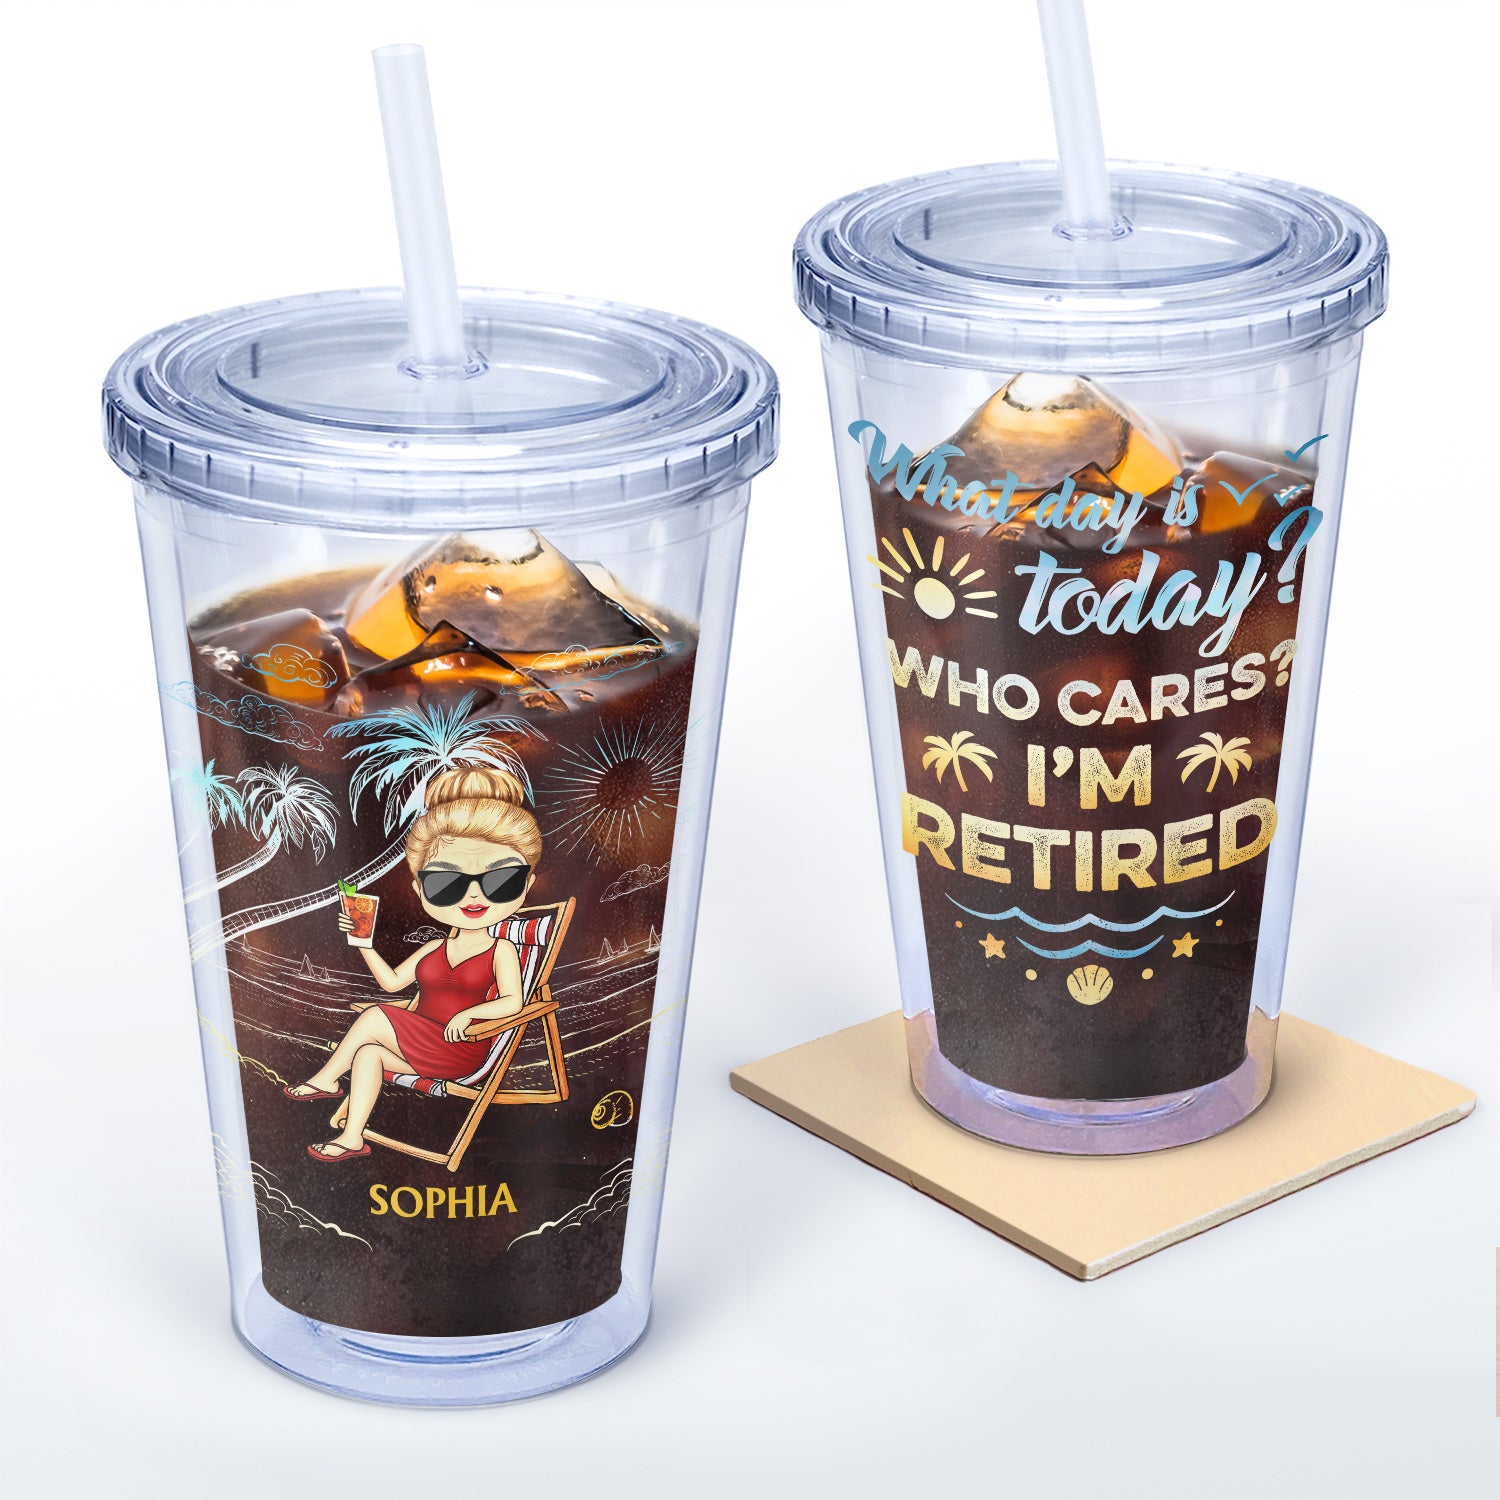 What Day Is Today Who Cares We're Retired - Gift For Parents, Grandparents, Retired, Retirement Gift - Personalized Acrylic Insulated Tumbler With Straw